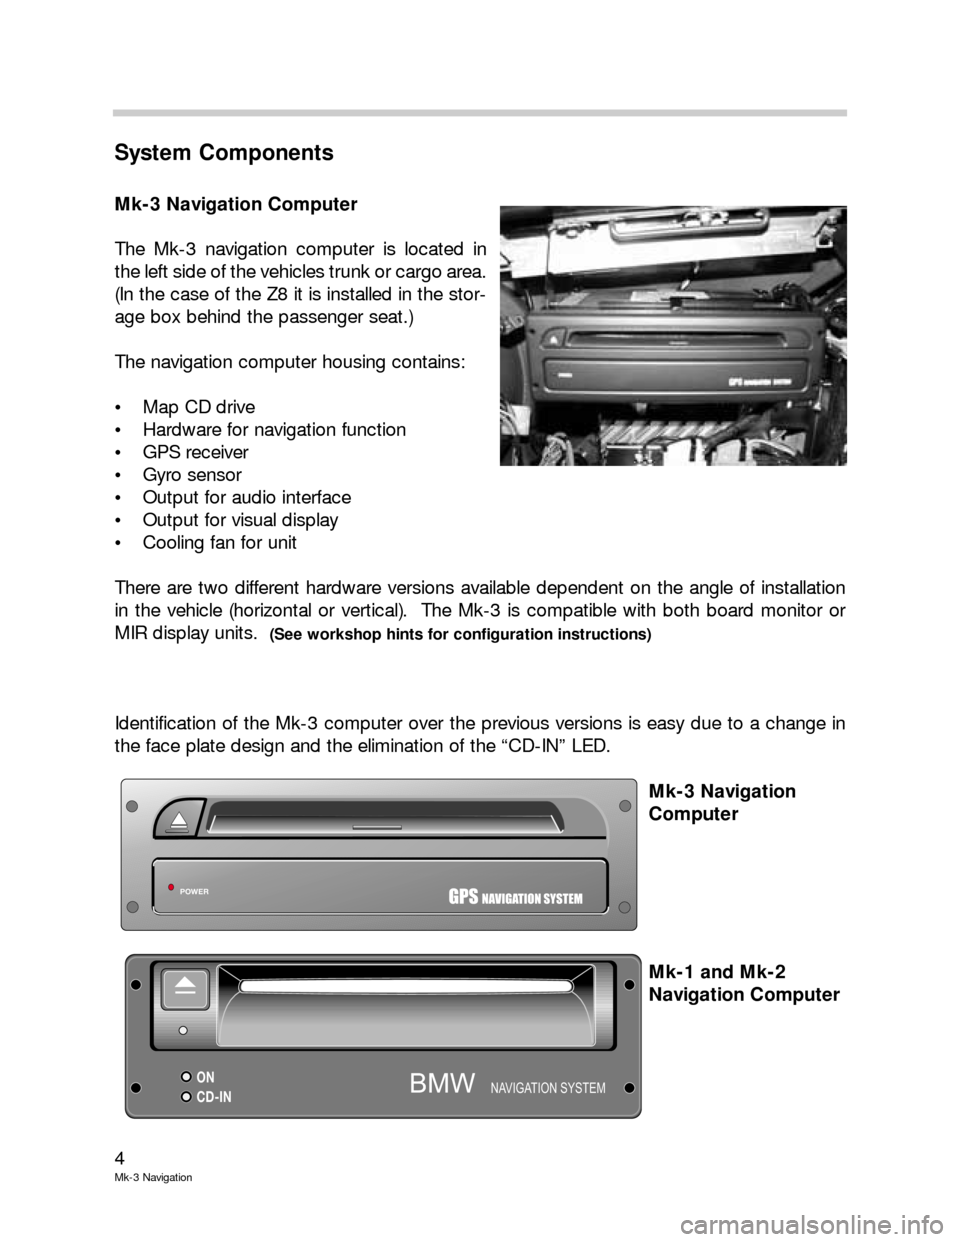 BMW X5 2004 E53 Mk3 Navigation System Manual 4
Mk-3 Navigation
System Components
Mk-3 Navigation Computer
The Mk-3 navigation computer is located in
the left side of the vehicles trunk or cargo area.
(In the case of the Z8 it is installed in the